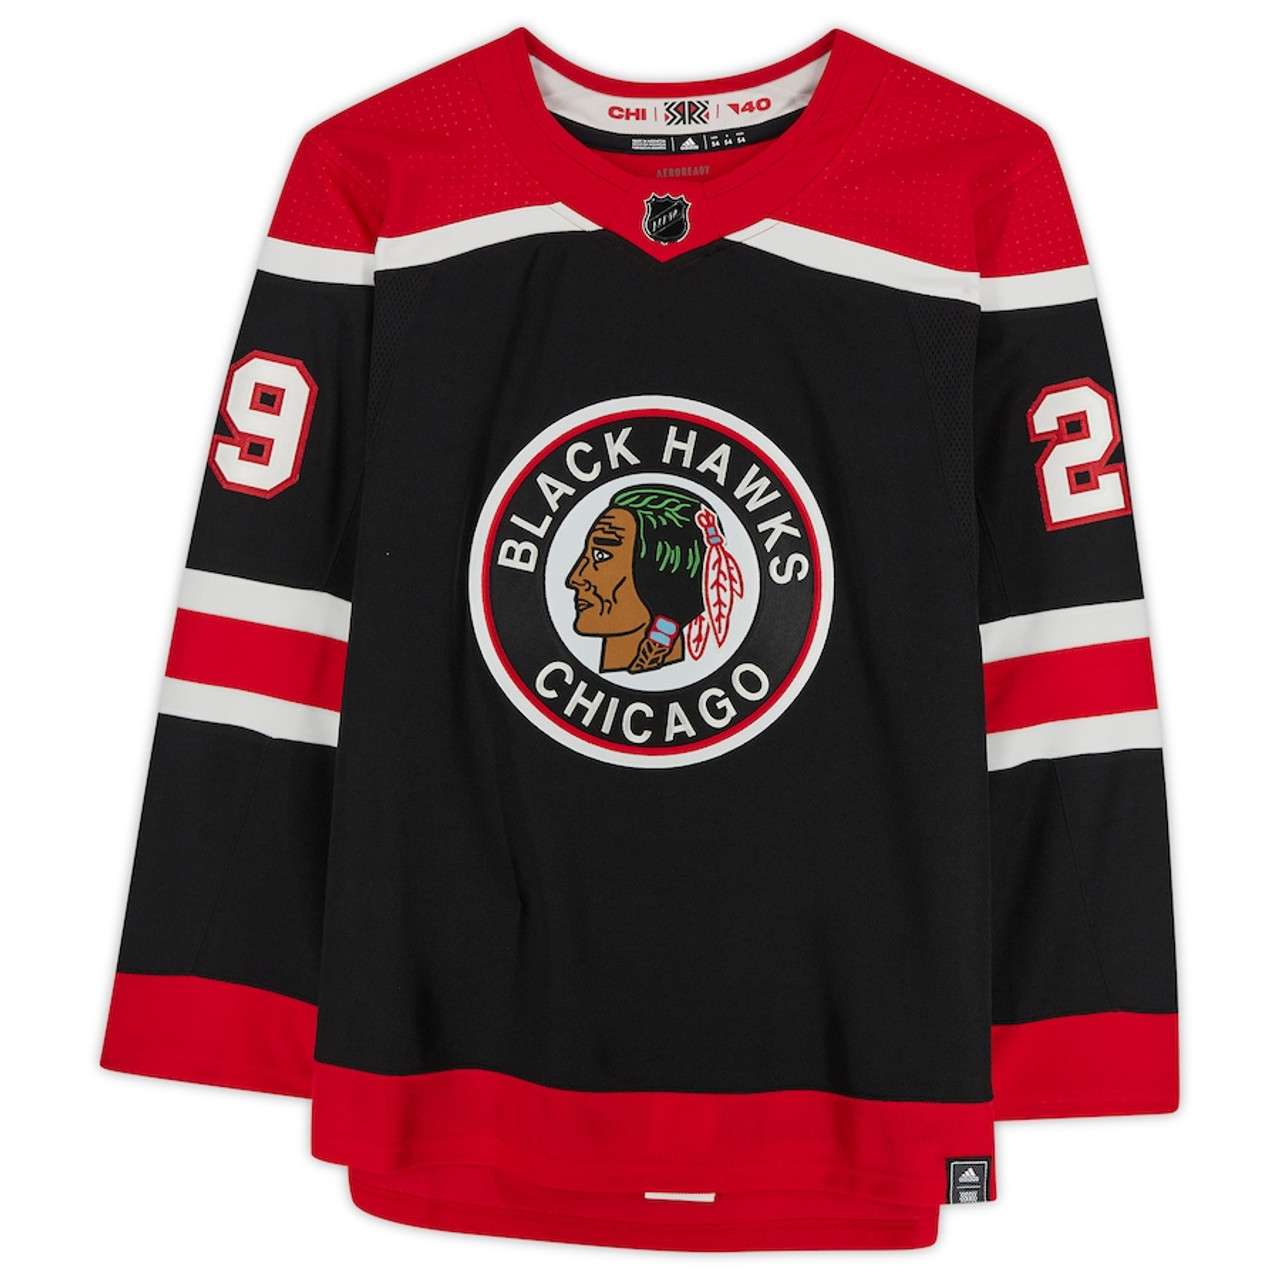 Authentic 1930s Blackhawks jersey featured on 'Antiques Roadshow